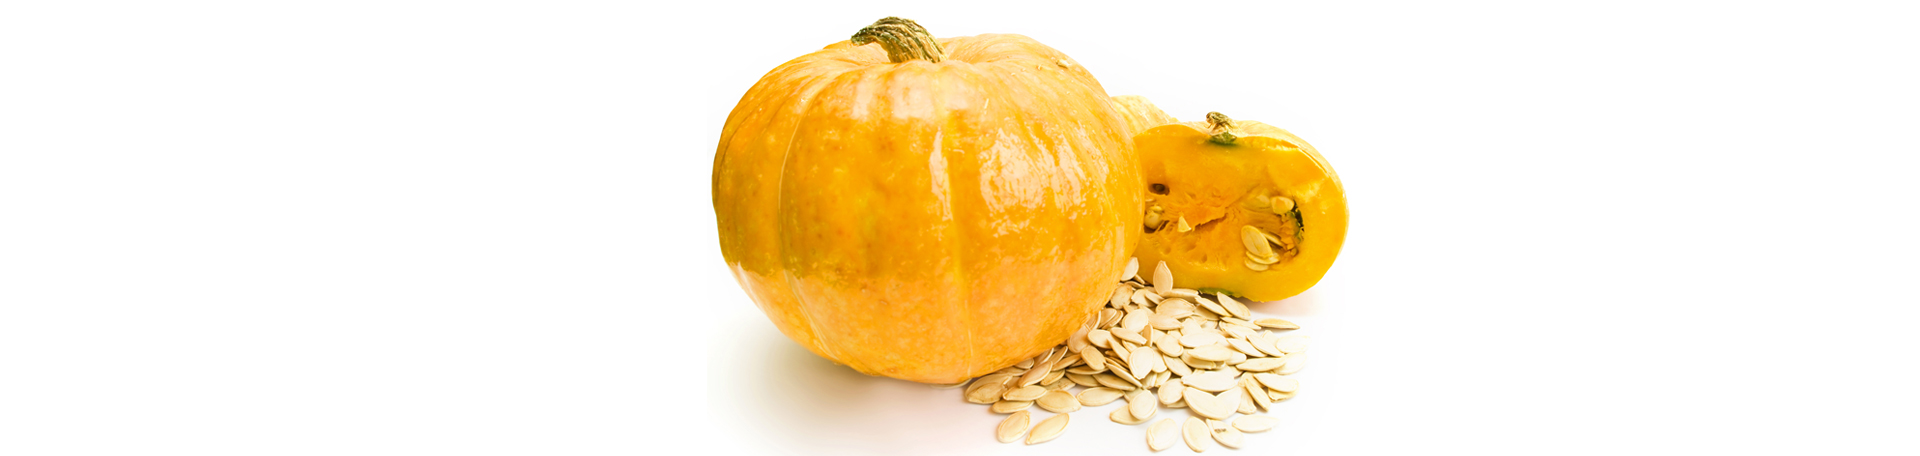 Easley chiropractic nutrition info on the pumpkin